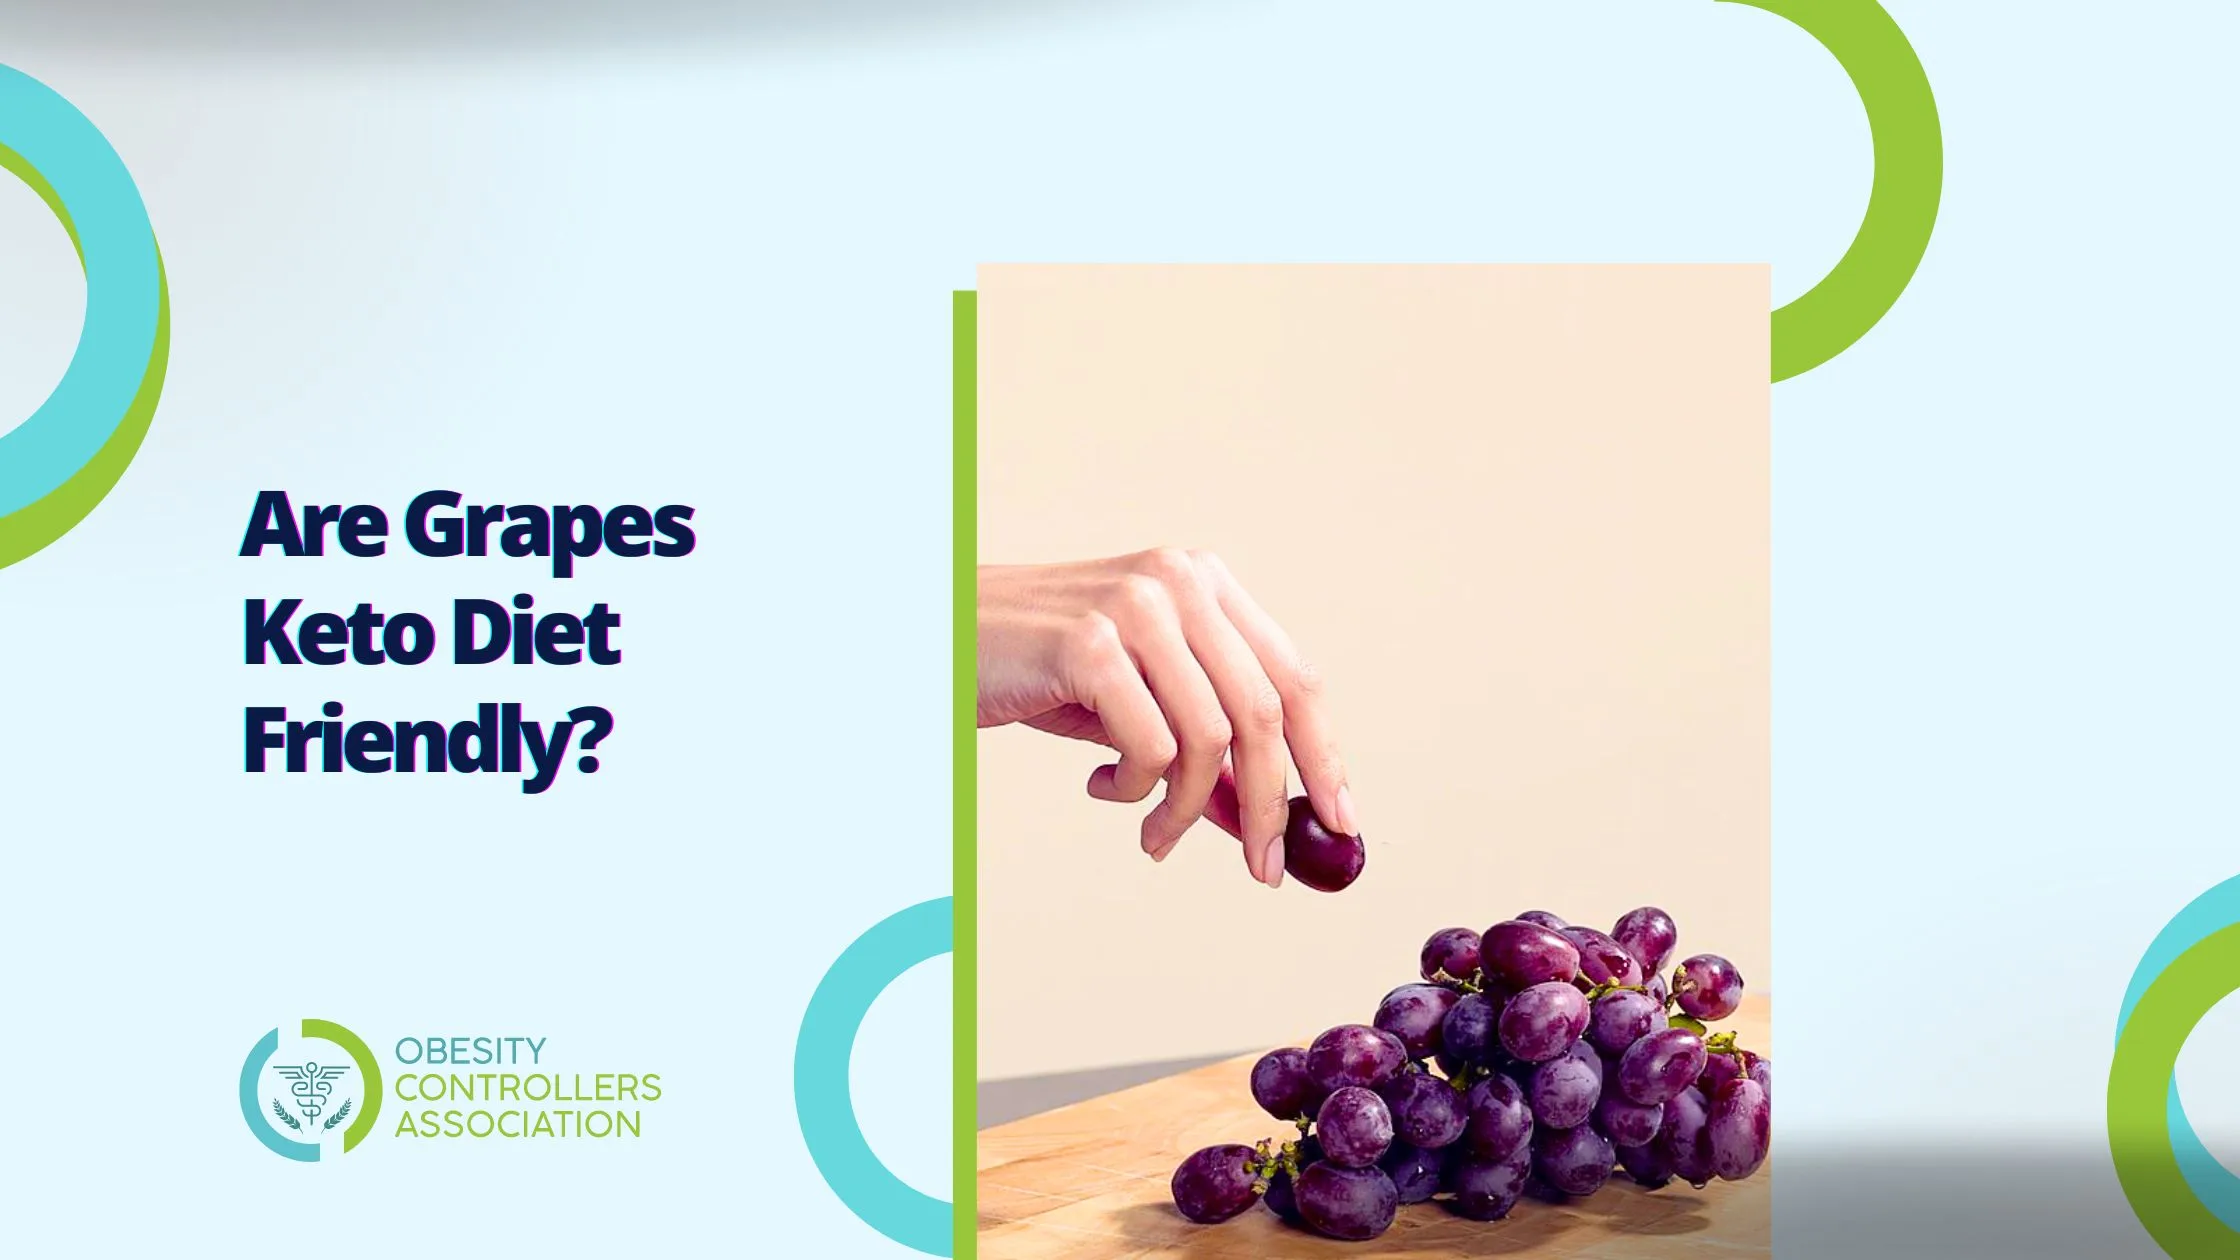 Grapes and Keto Diet